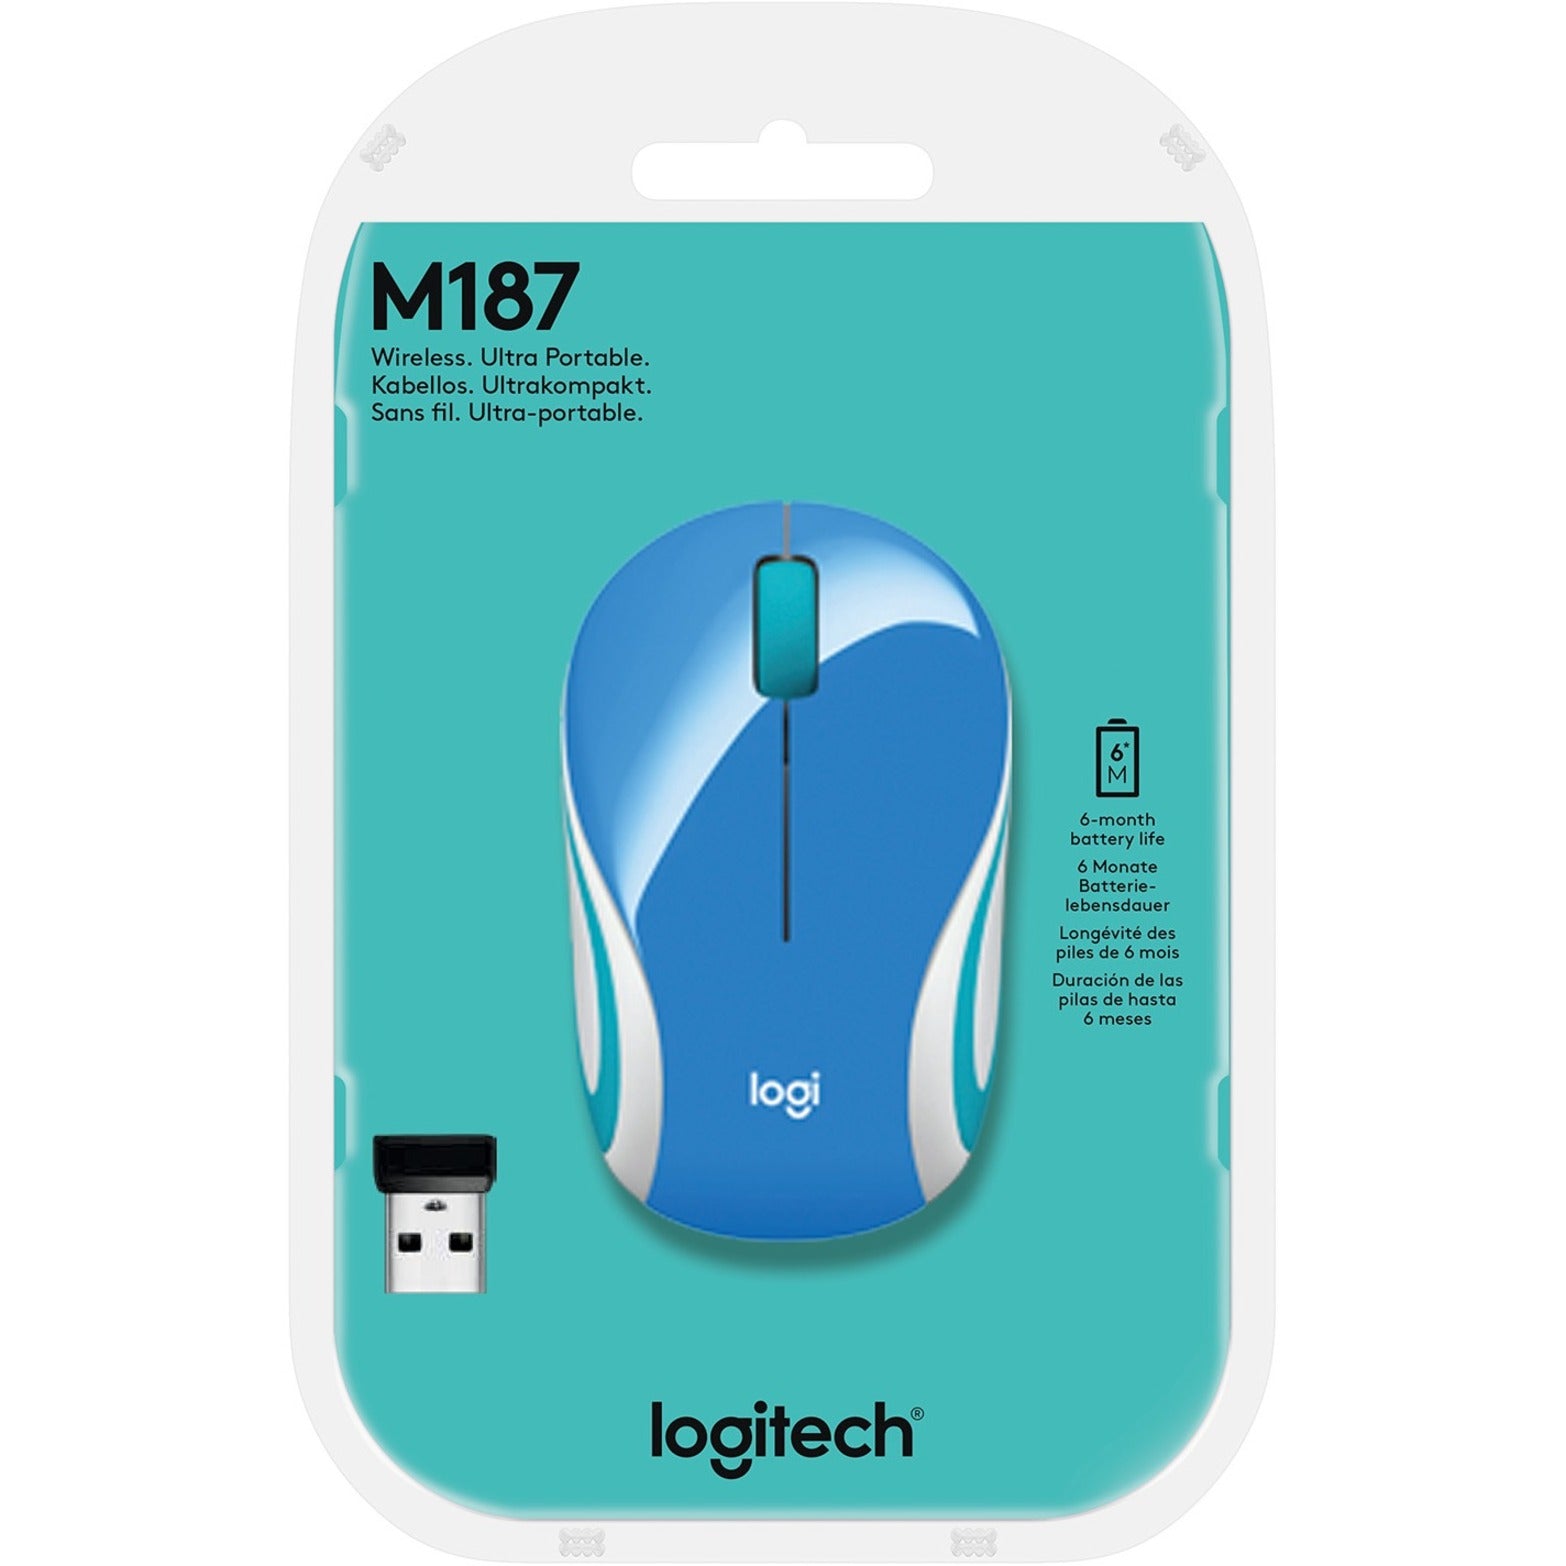 Logitech 910-005360 Wireless Mini Mouse M187 Ultra Portable, 2.4 GHz with USB Receiver, 1000 DPI Optical Tracking, 3-Buttons, PC / Mac / Laptop - Palace Blue